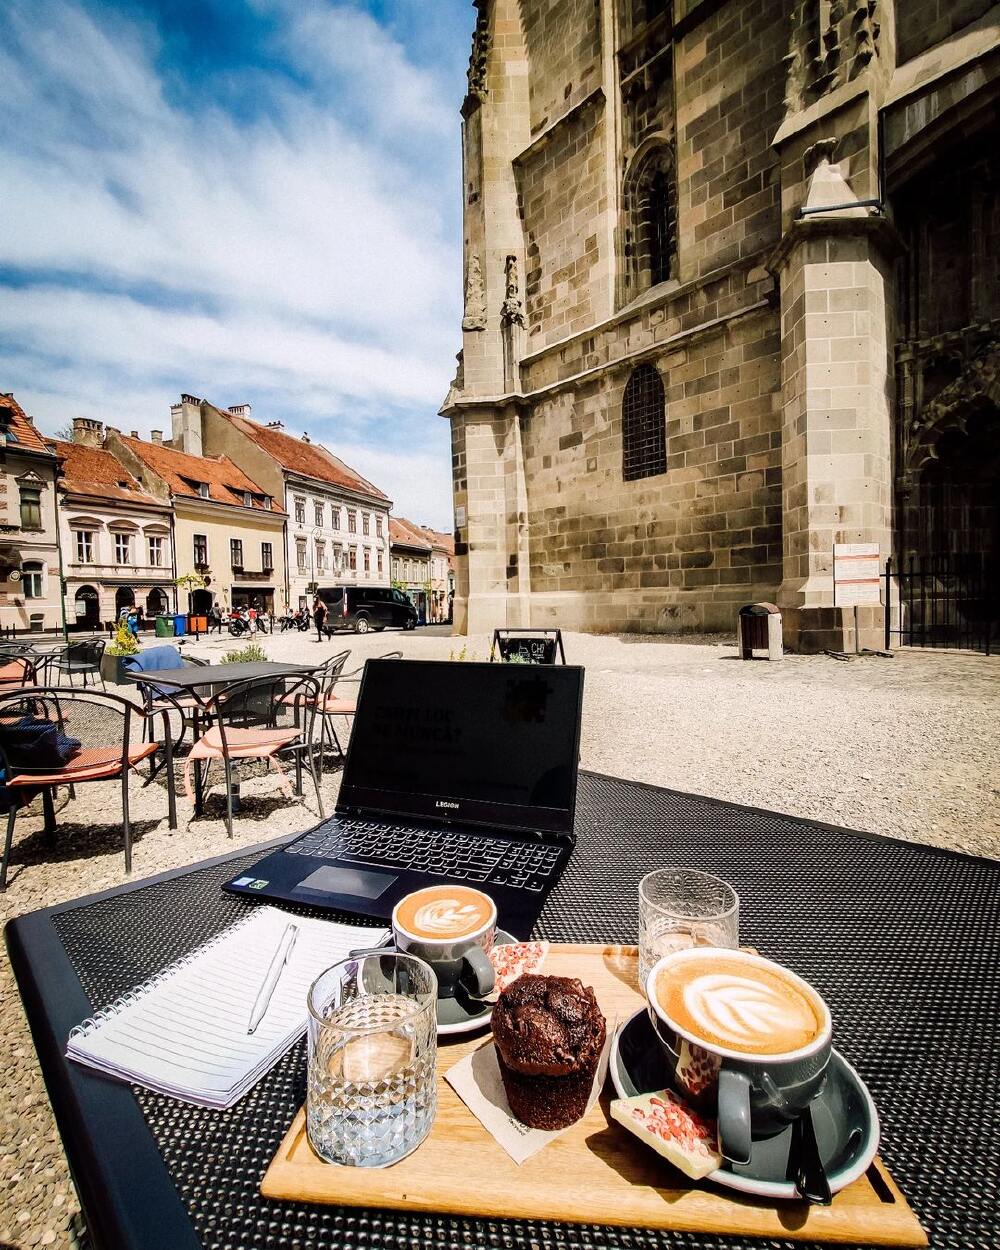 10 Work-Friendly Spots in Brasov with Good Coffee and Bites